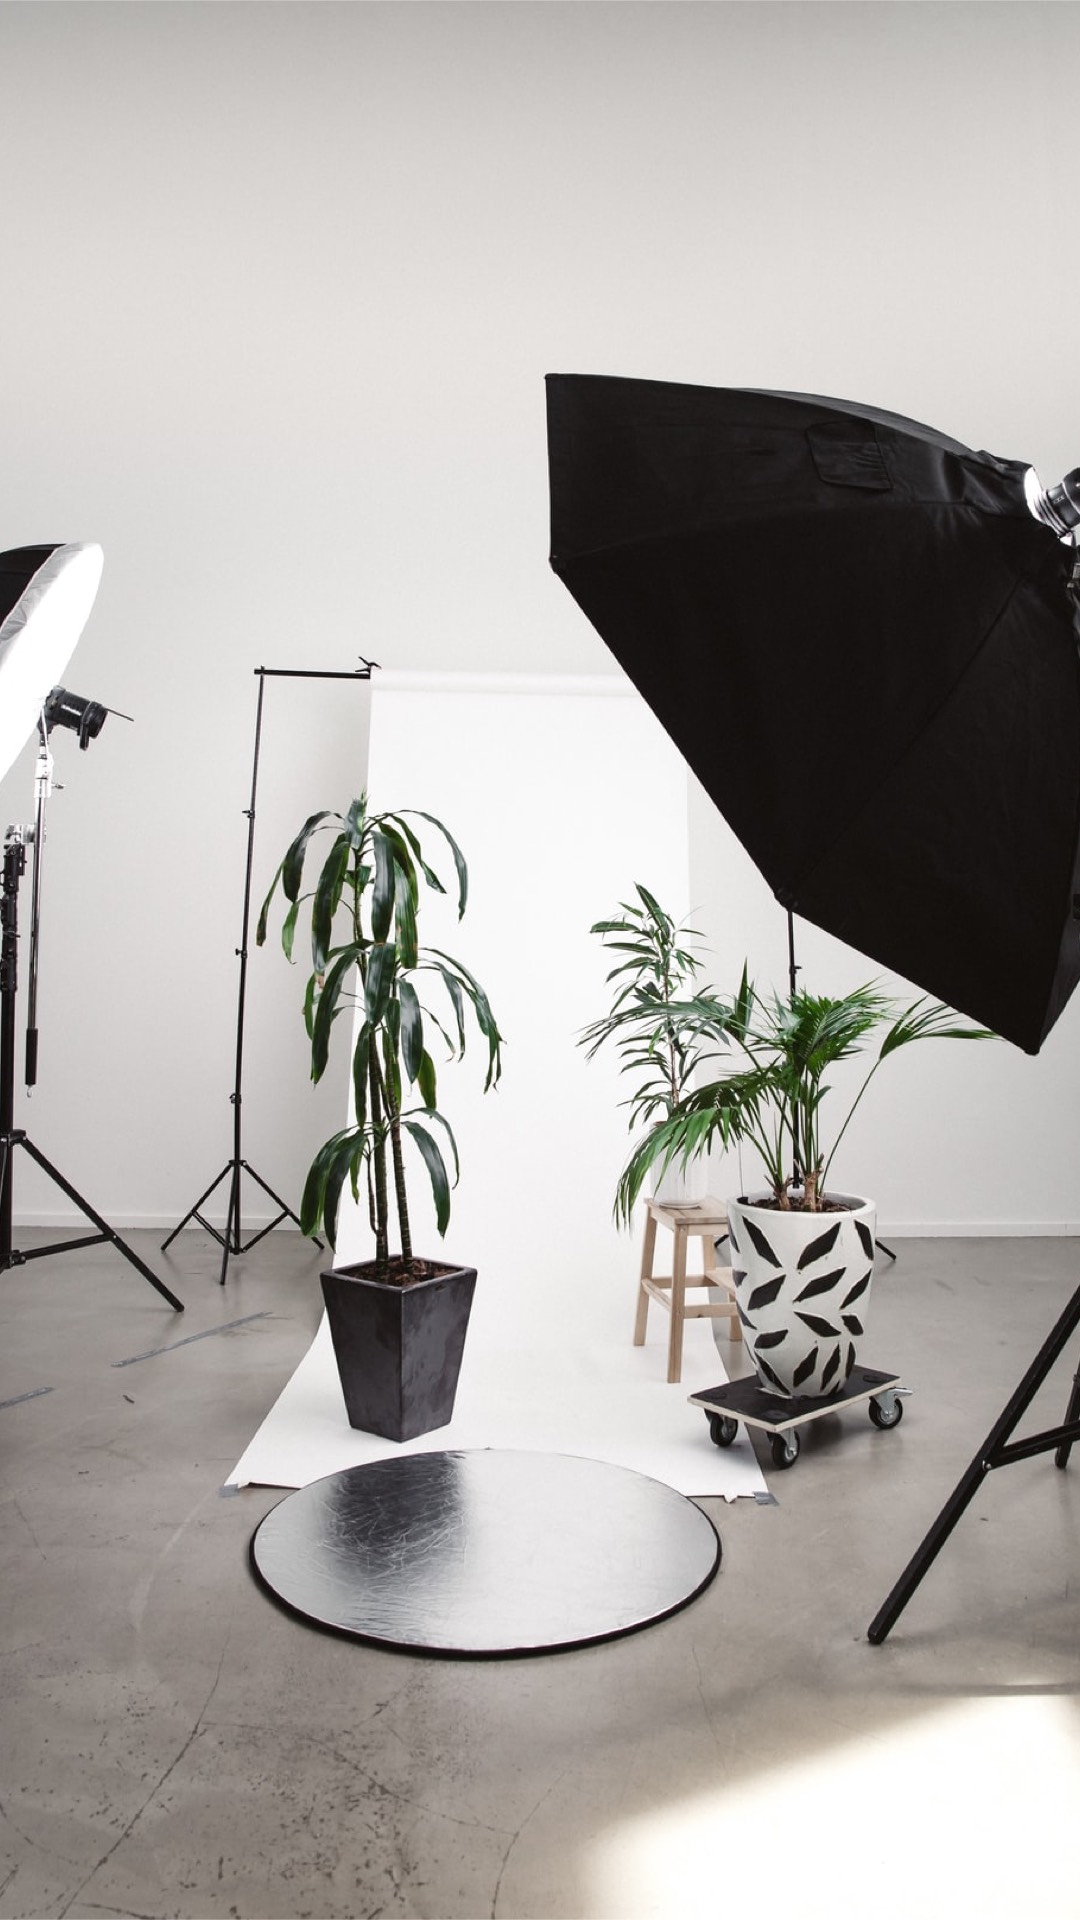 A Photo Studio With A Black Umbrella And Potted Plants Zoom Backgrounds Template